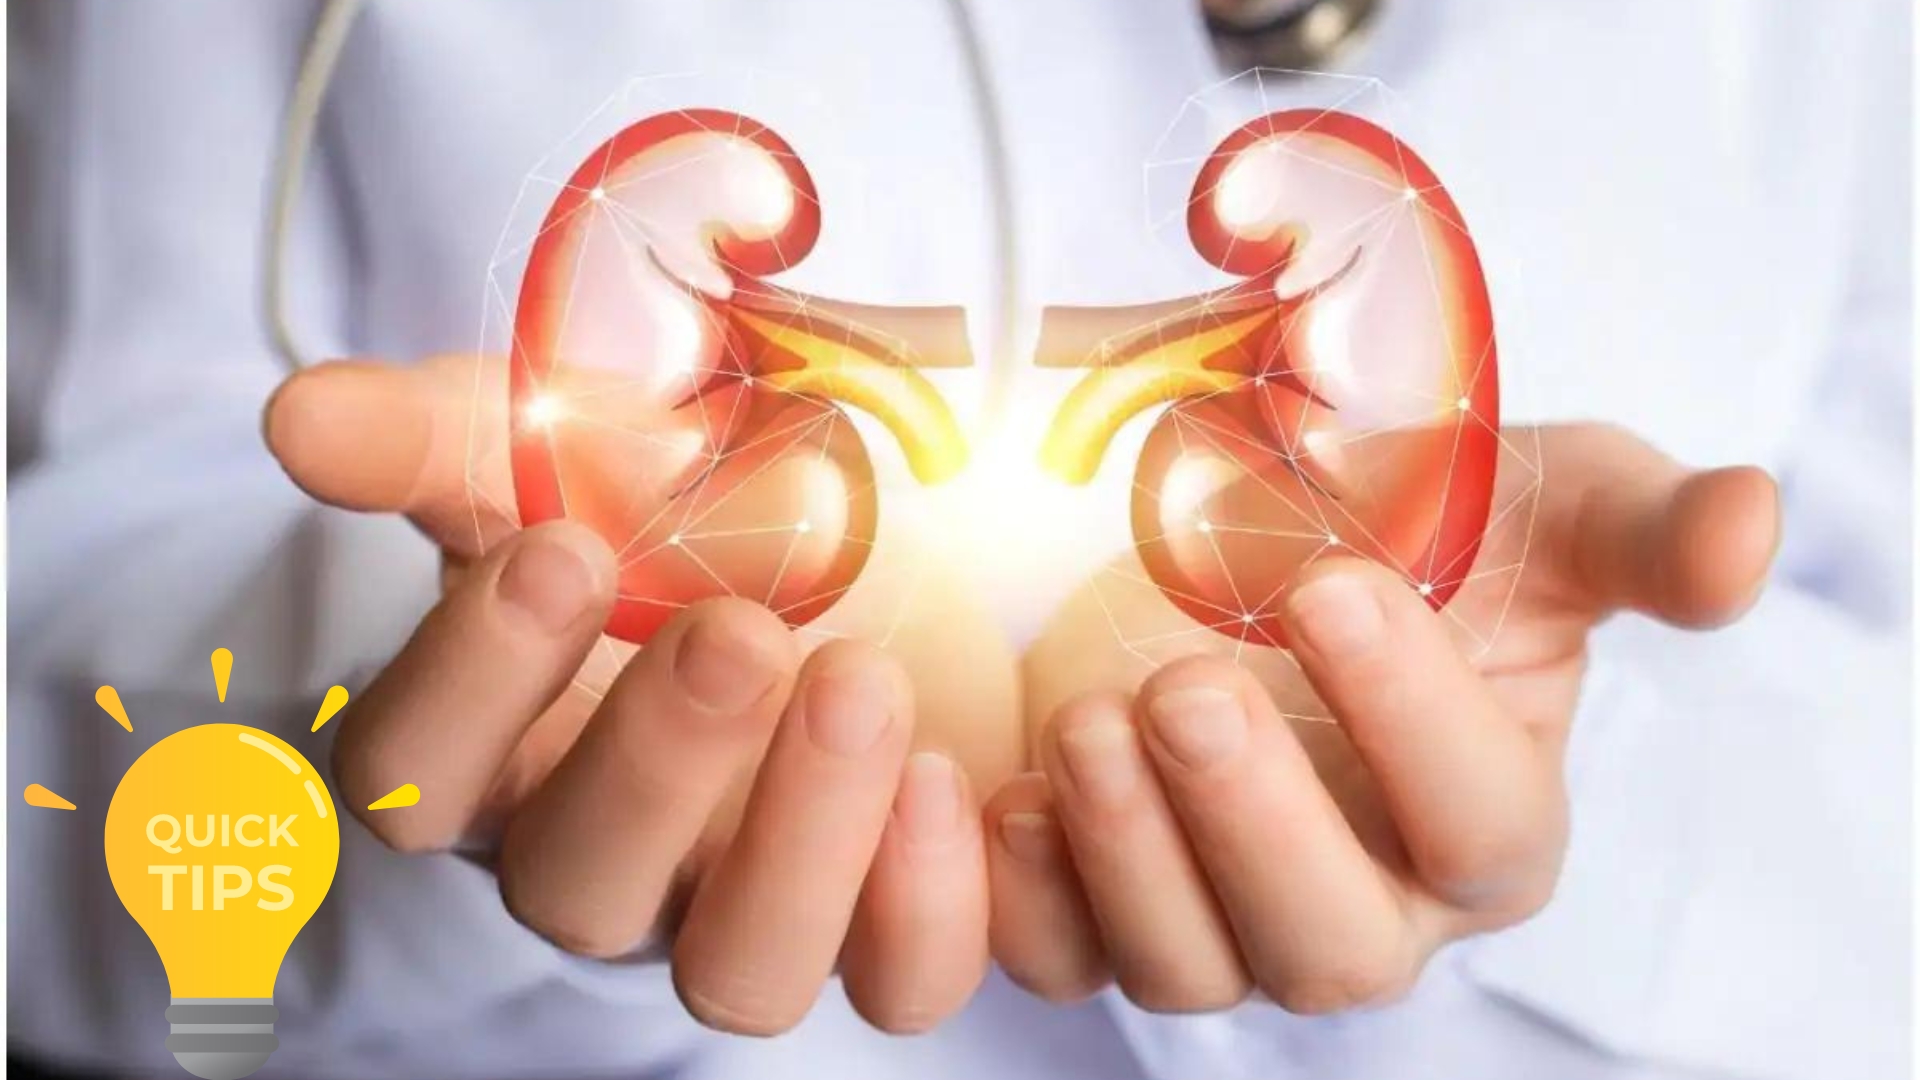 Tips for keeping your kidneys healthy